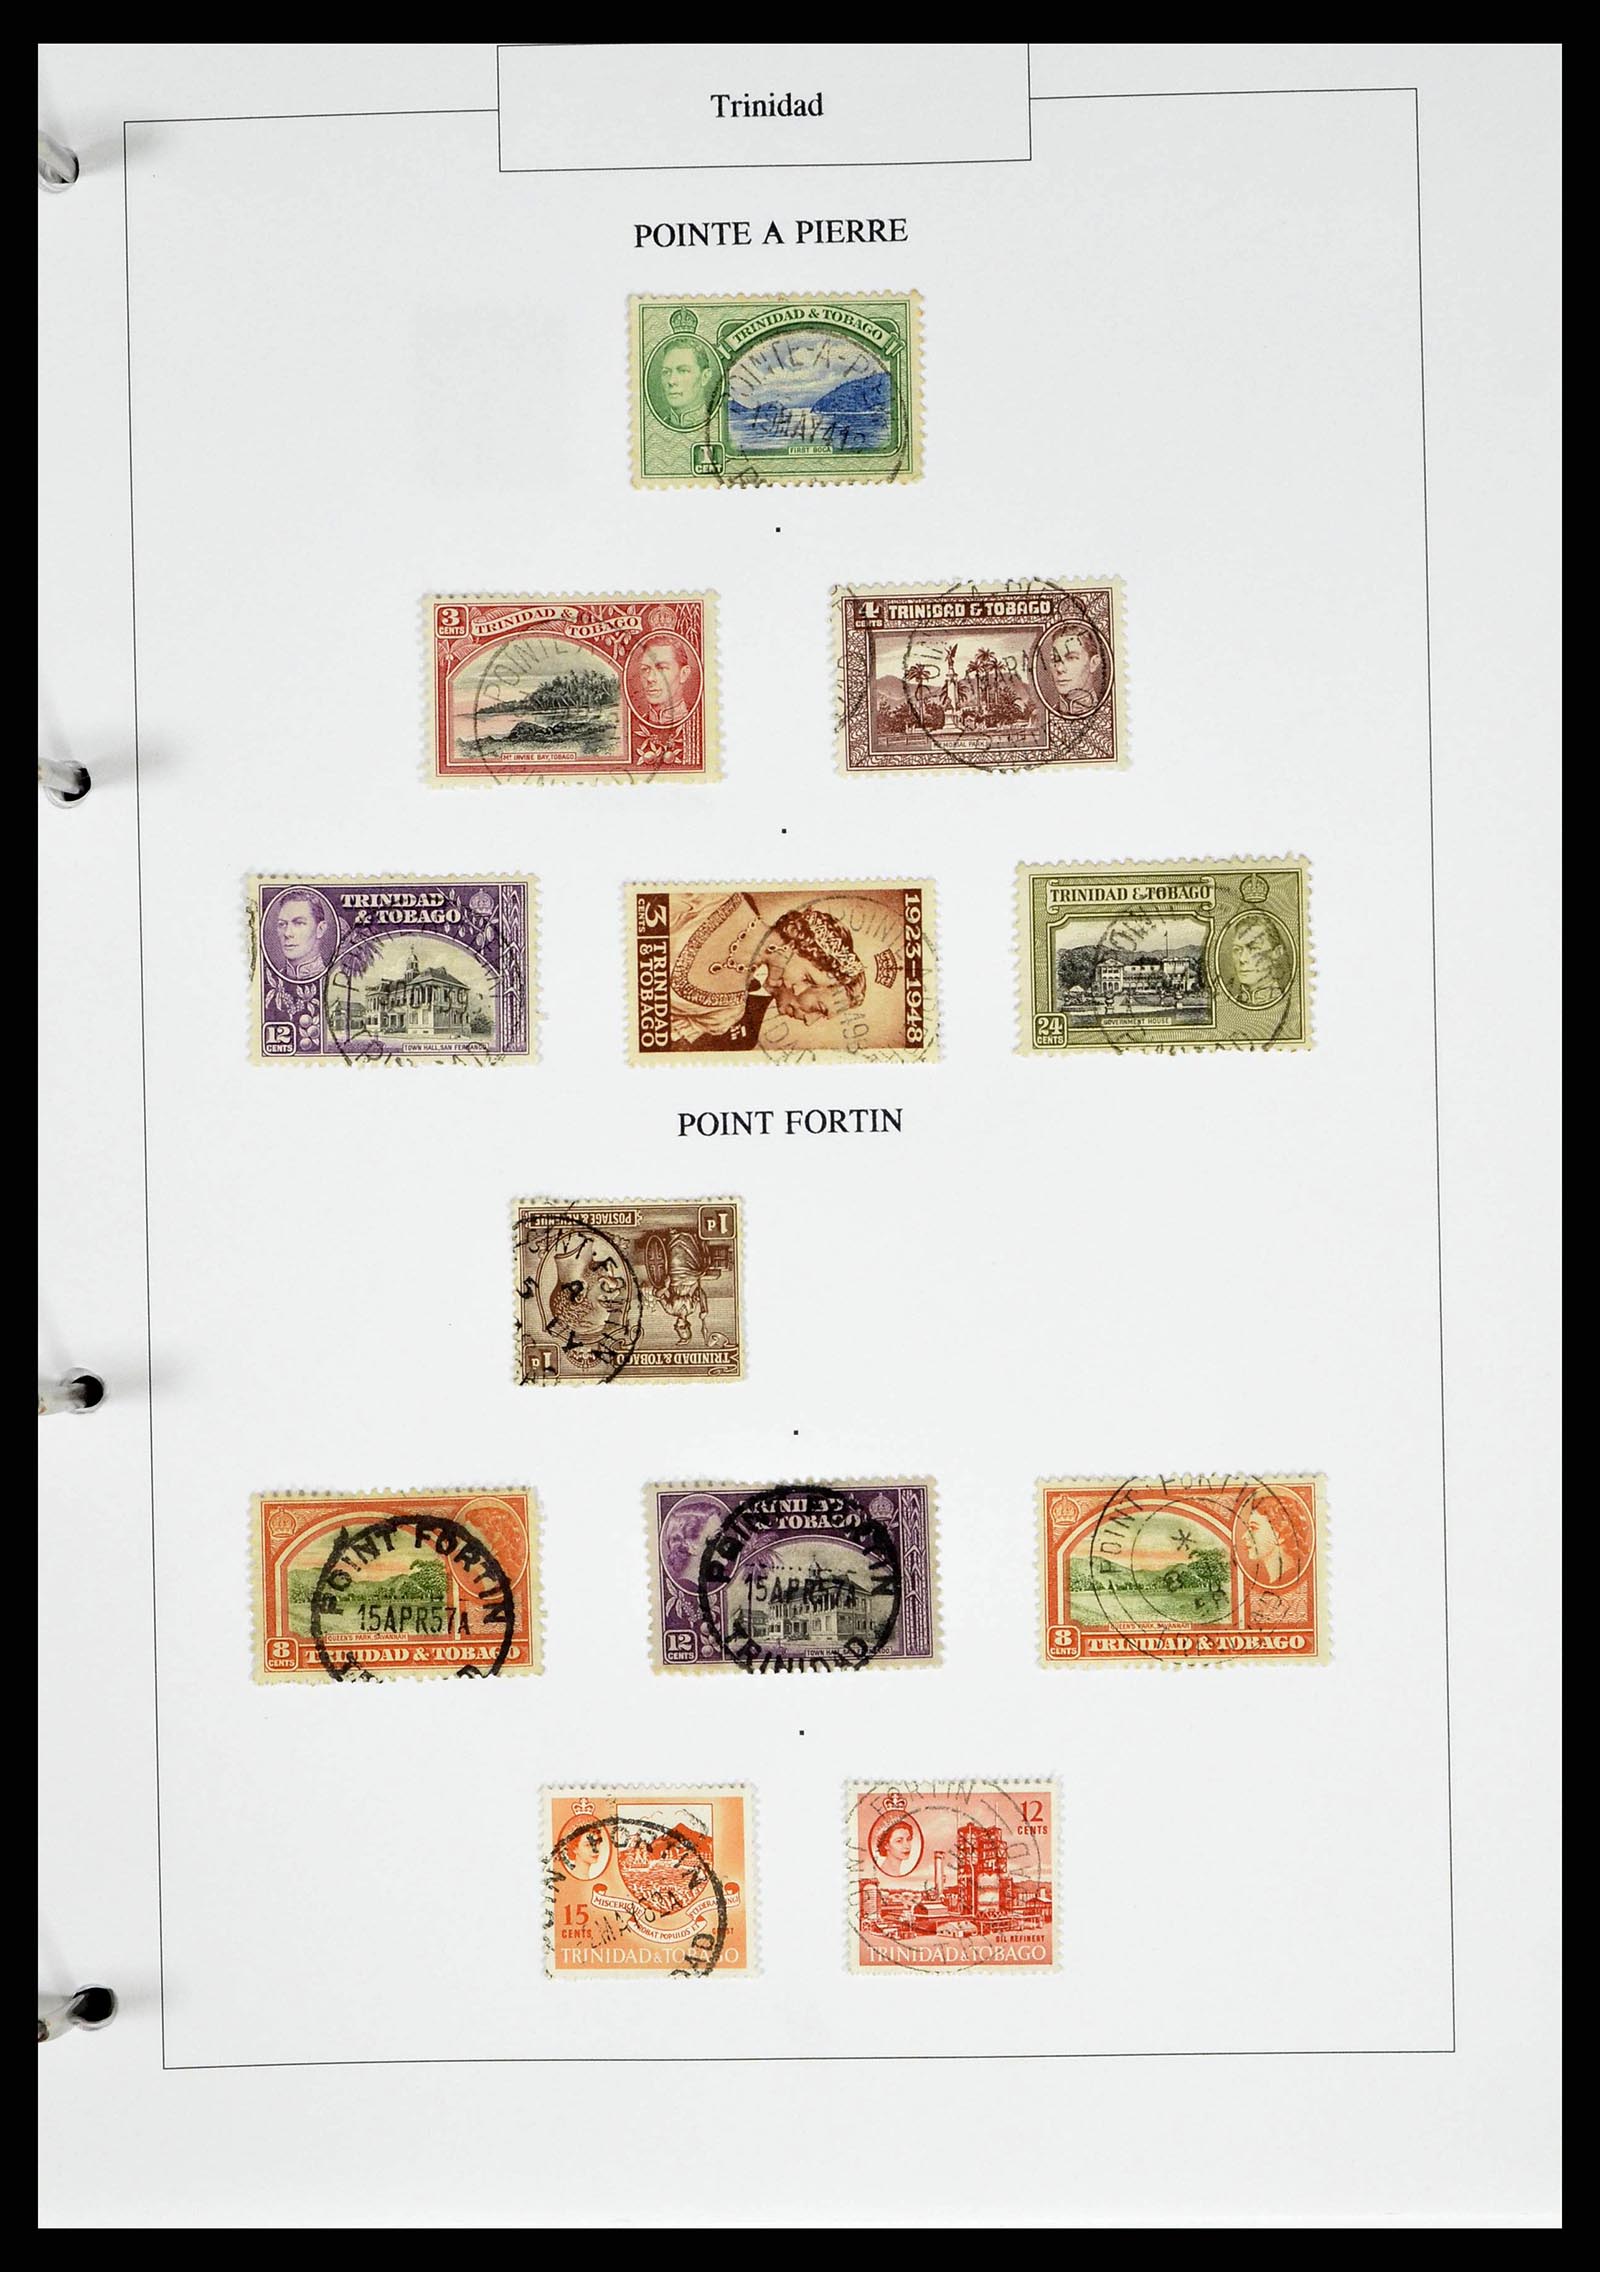 38481 0038 - Stamp collection 38481 Trinidad and Tobago cancels 1859-1960.